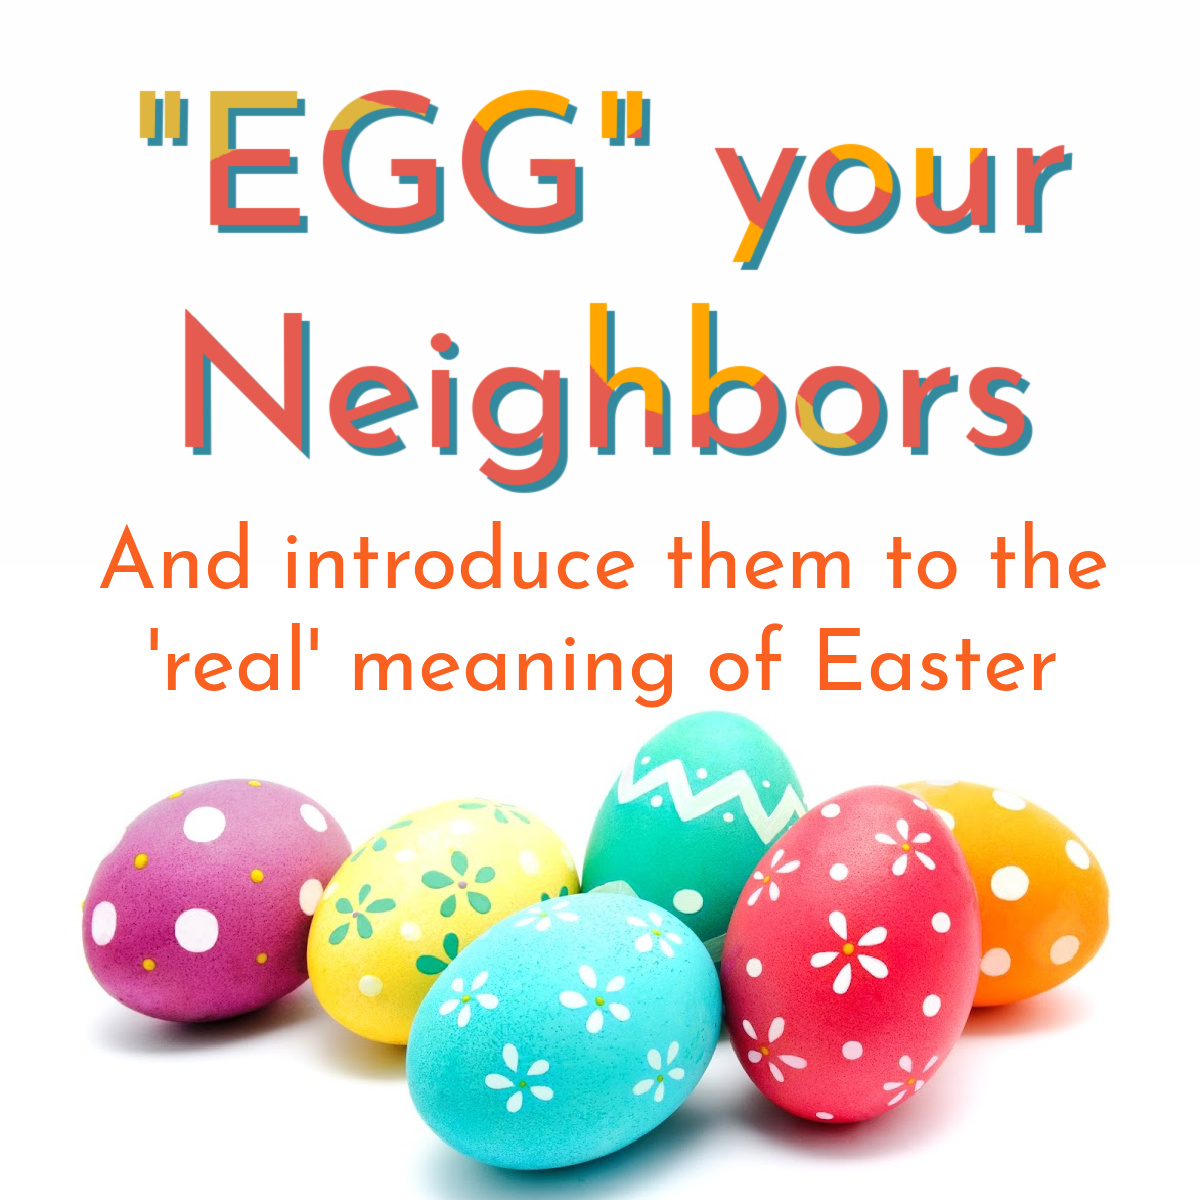 The right way to “EGG” your neighbors!